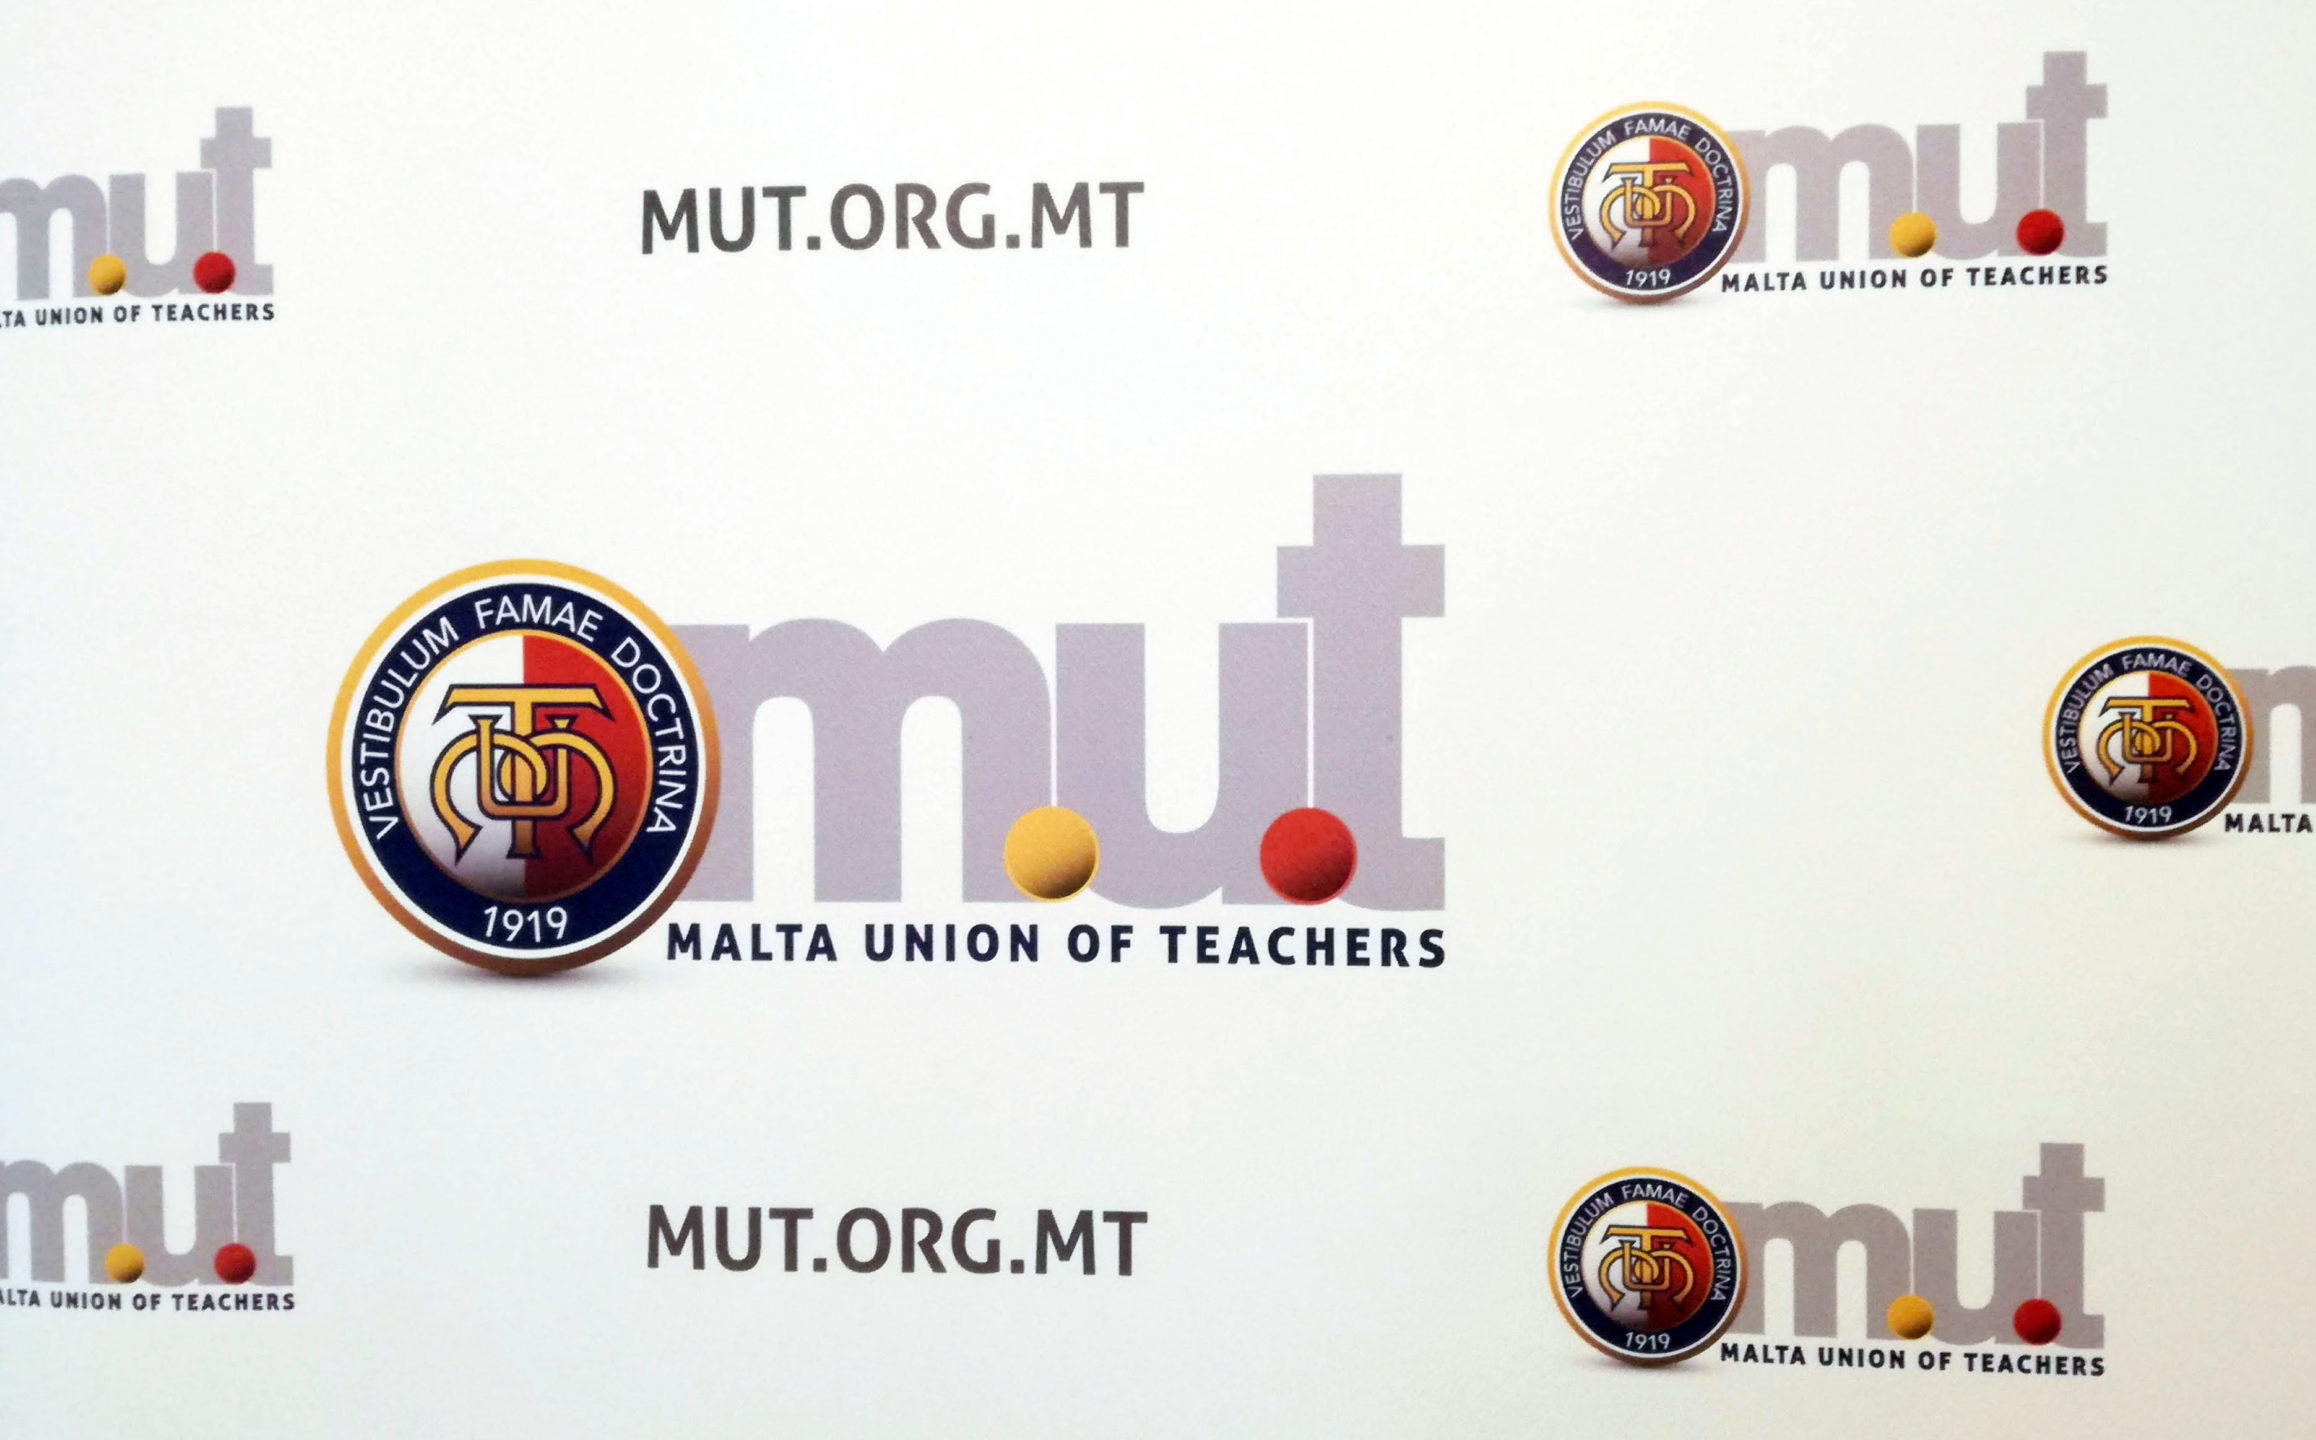 MUT’s position on school hours unchanged